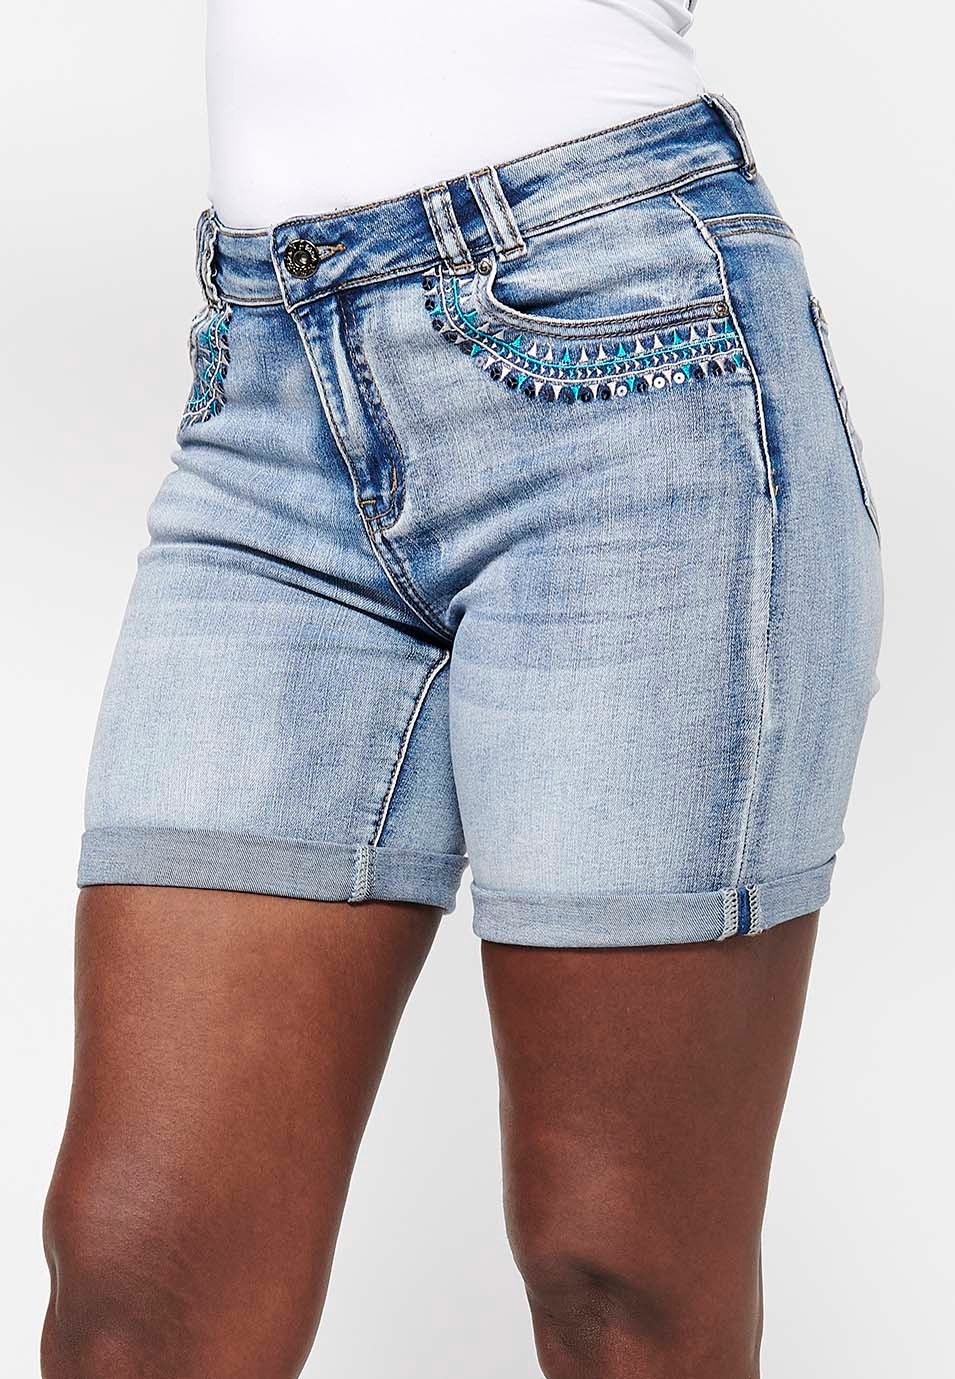 Blue Denim Shorts with Embroidered Details and Front Closure with Zipper and Button for Women 5